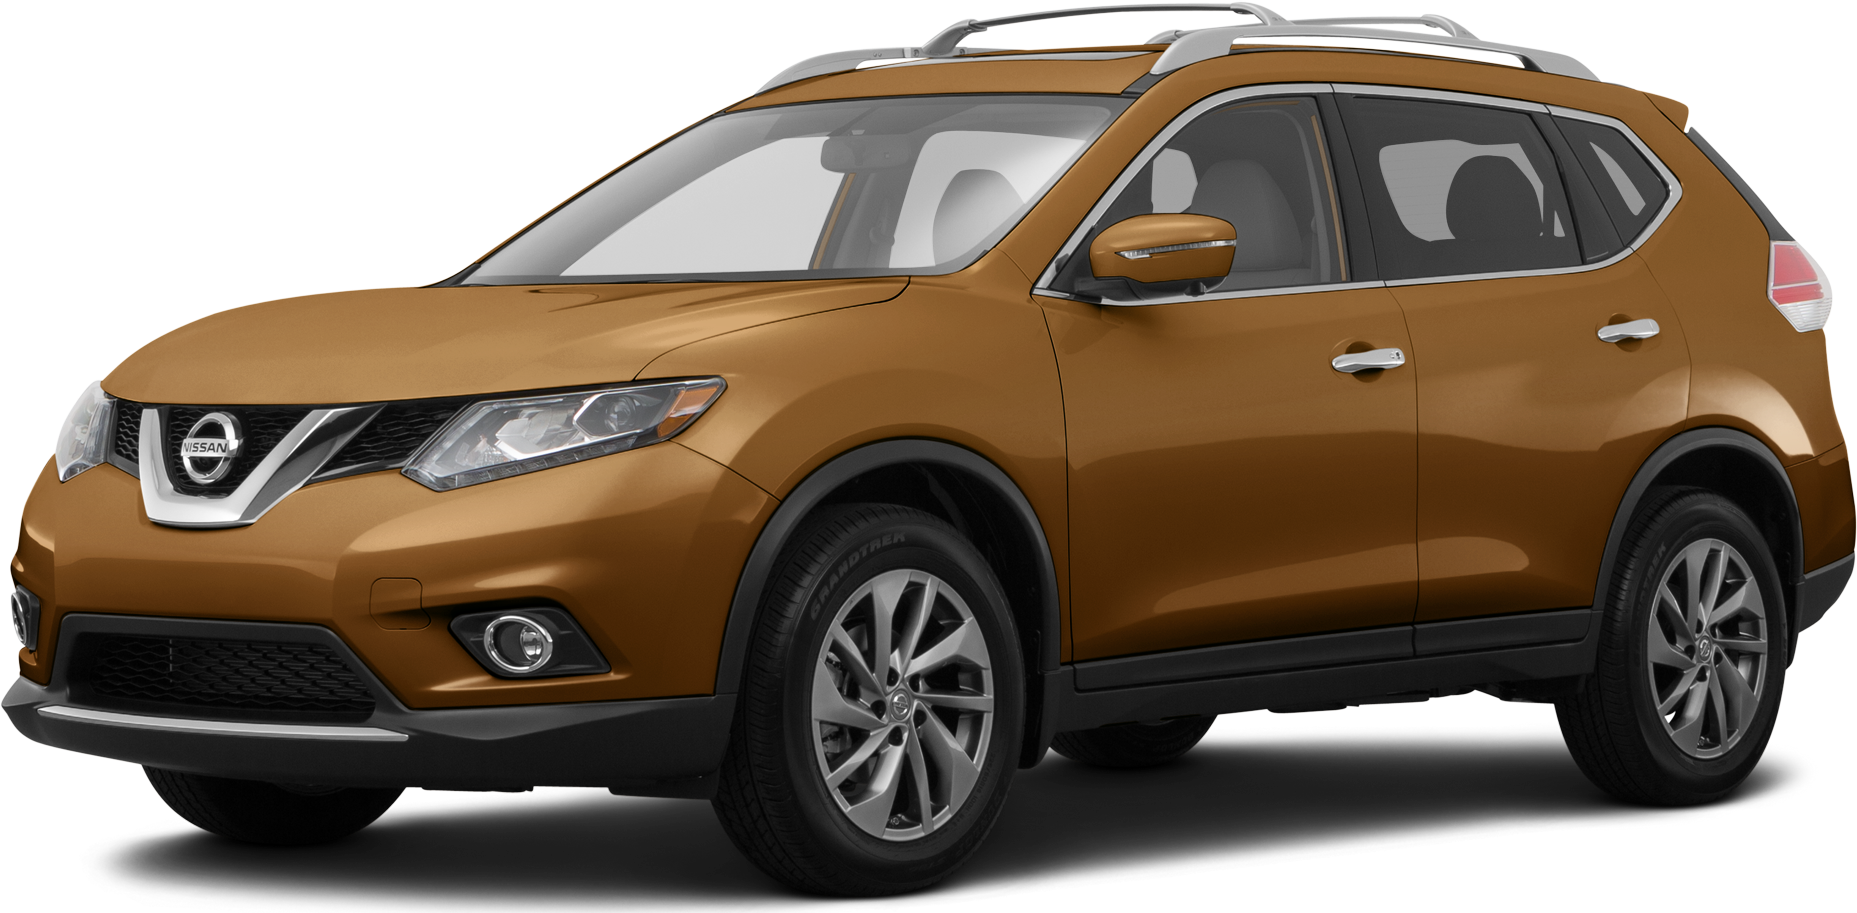 How To Start Nissan Rogue With Manual Key